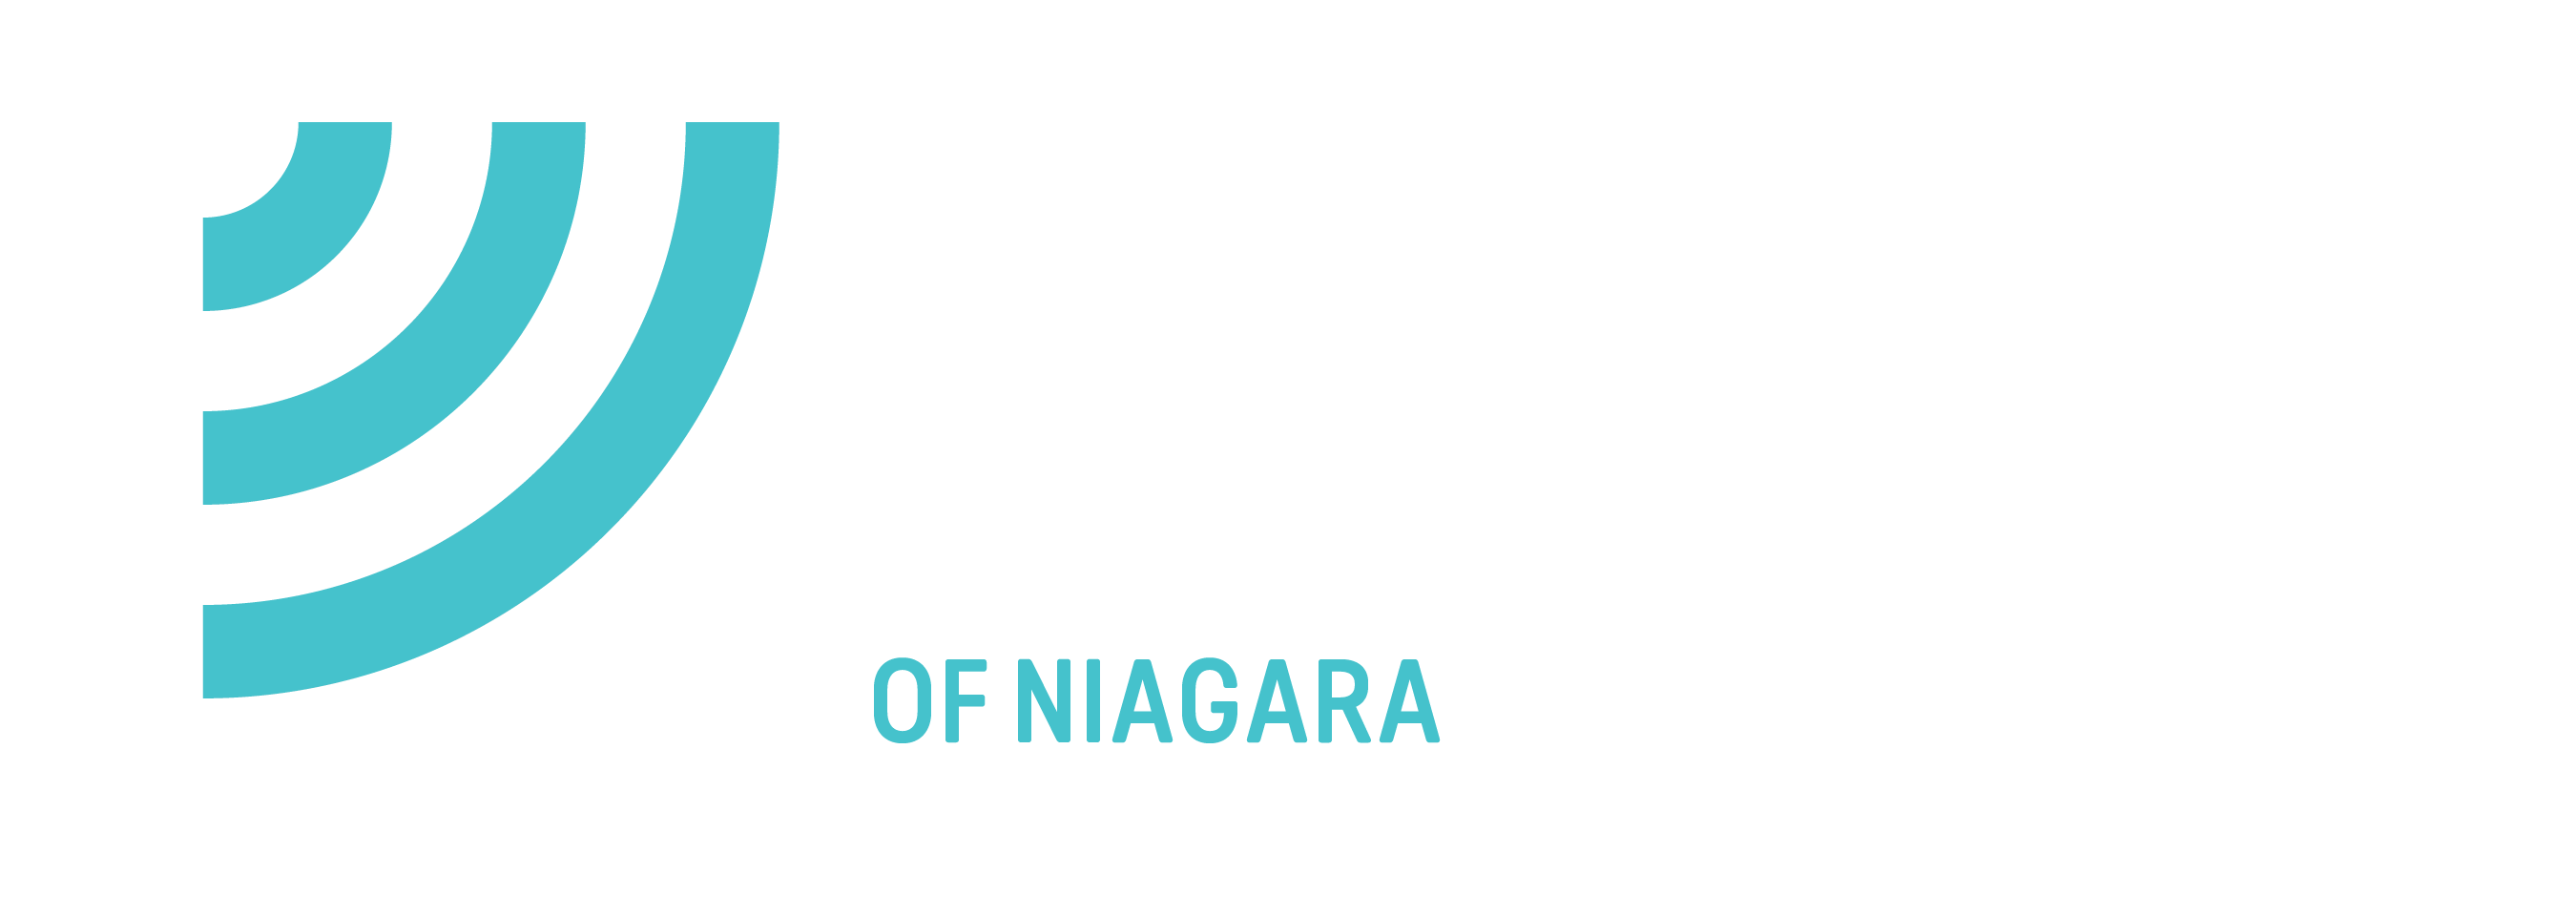 A REWARDING EXPERIENCE FOR SYED - Big Brothers Big Sisters of Niagara